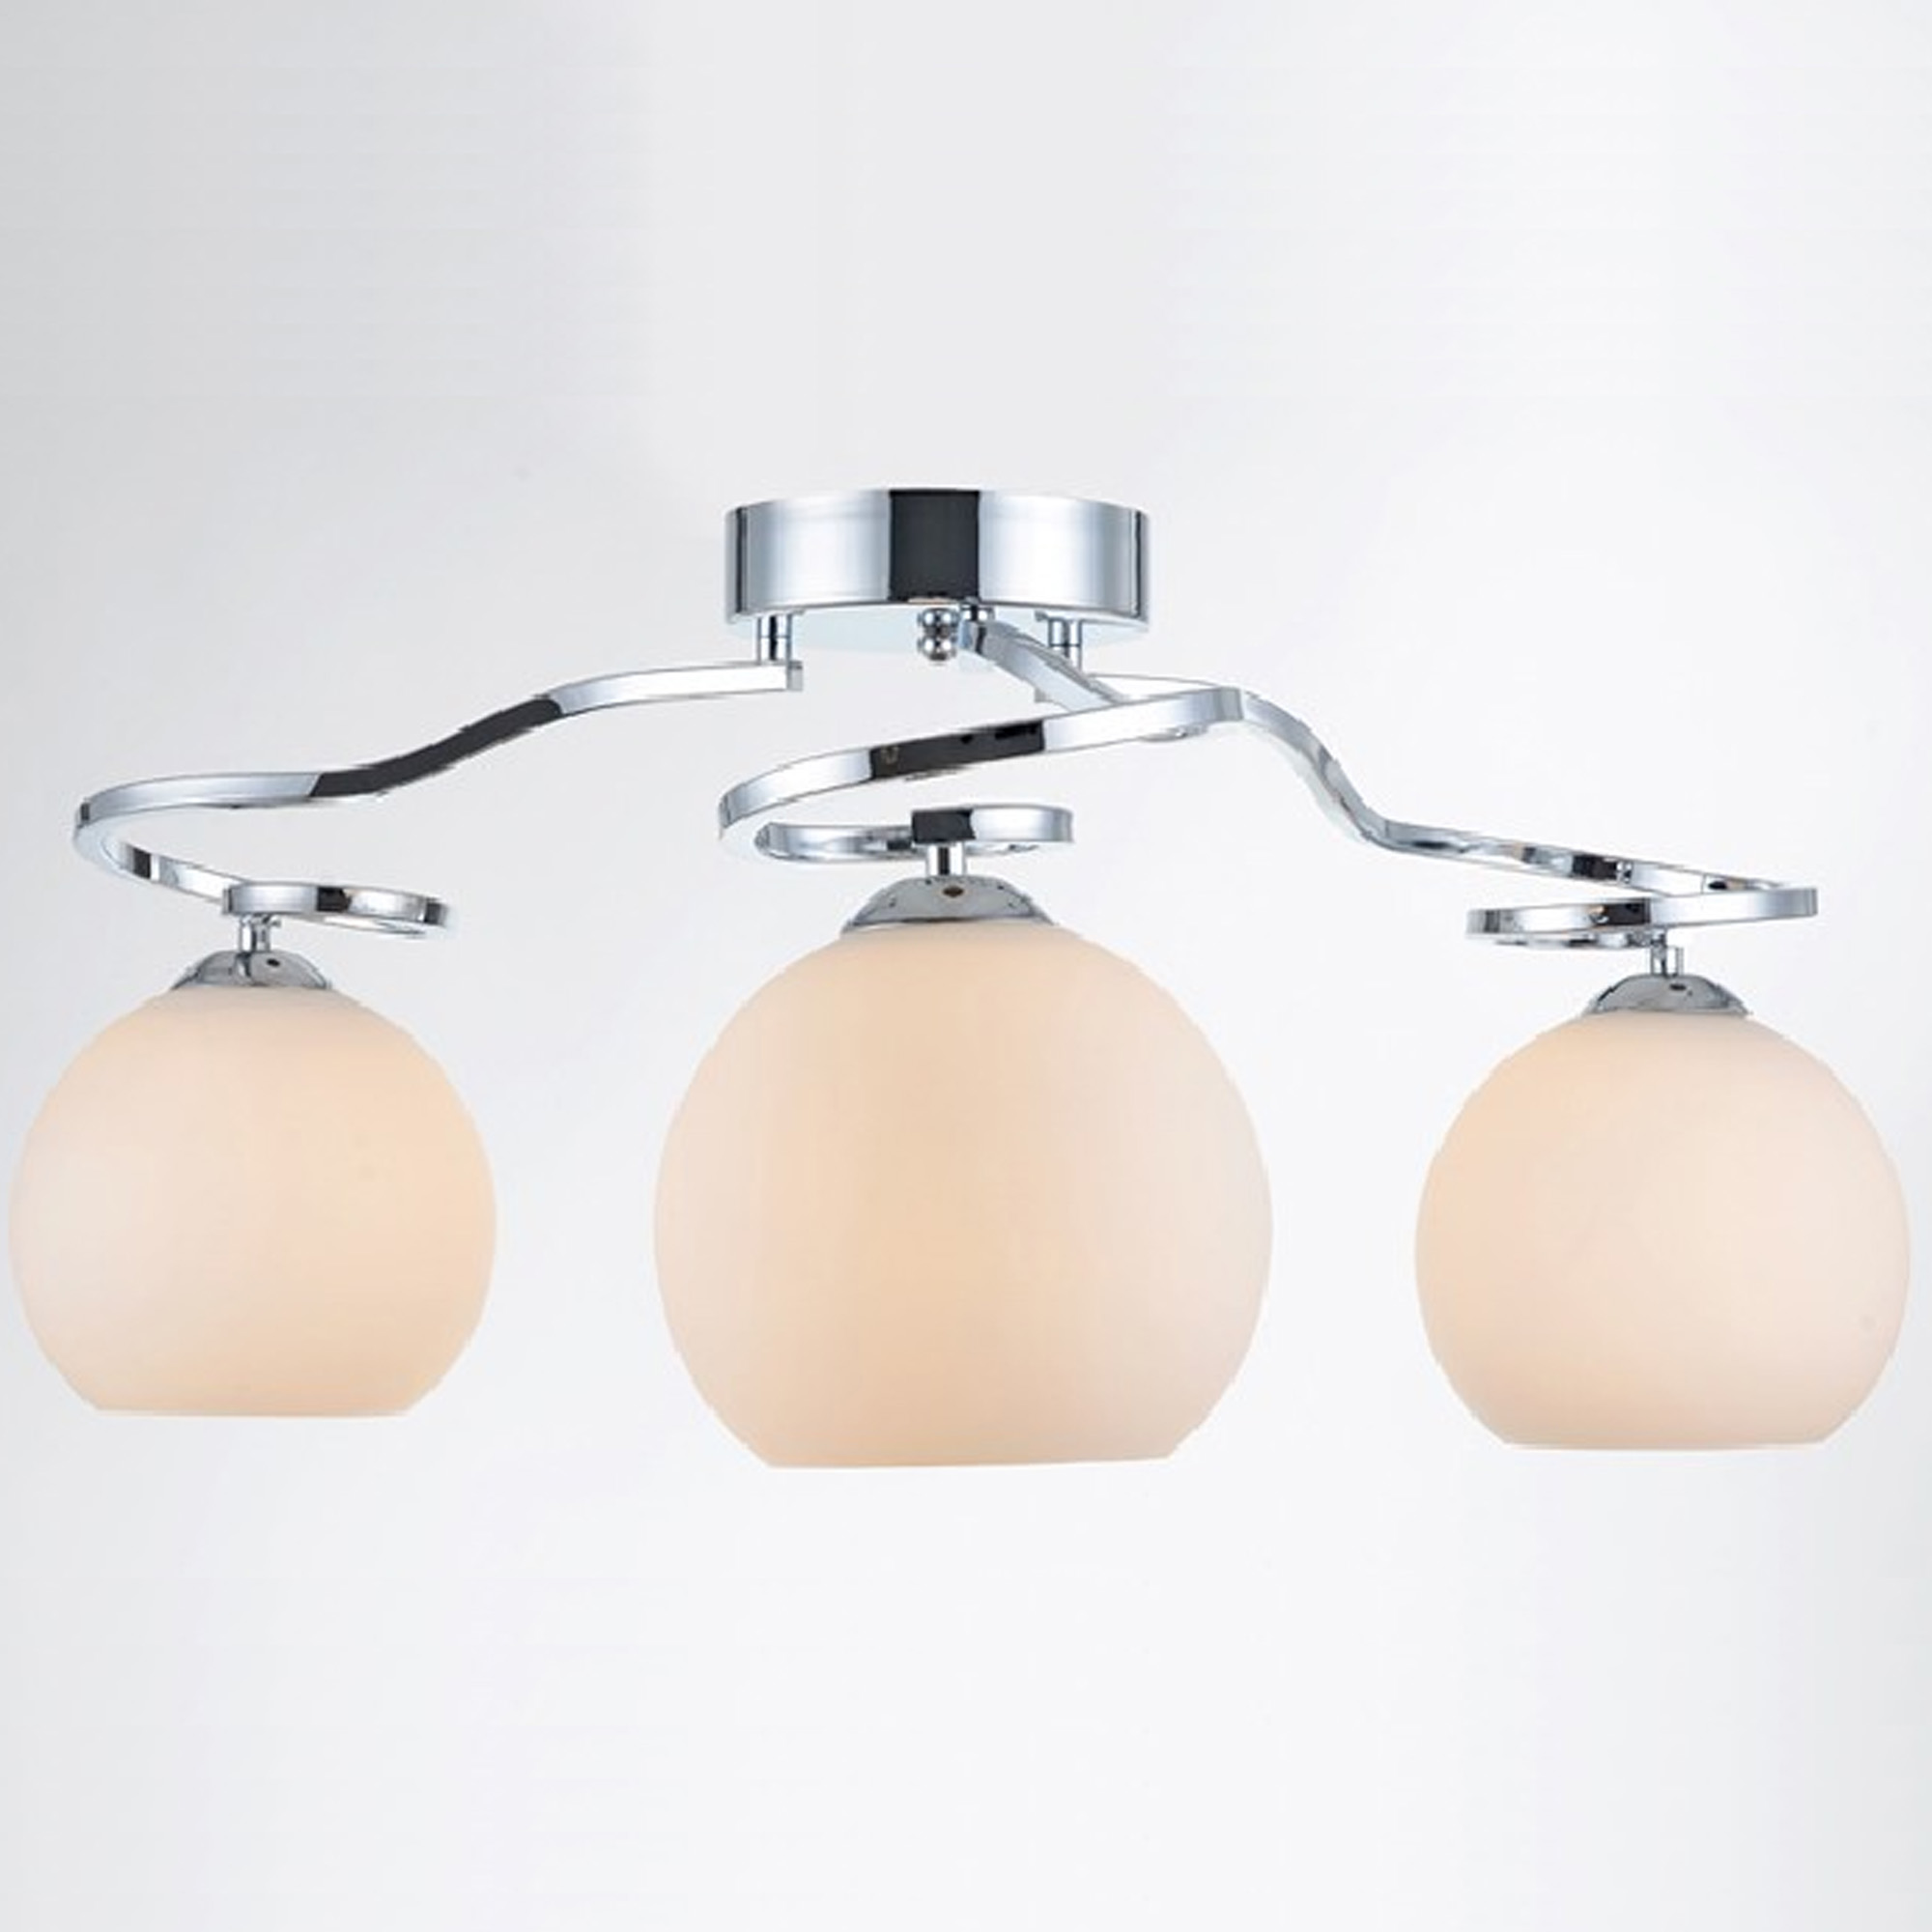 New Elegant ceiling lamp HL-9528-3X-1.New Elegant ceiling lamp HL-9528-3X    2.Modern simple style design   3.High Quality,The best services   4.this ceiling lamp can be used for  many yaers